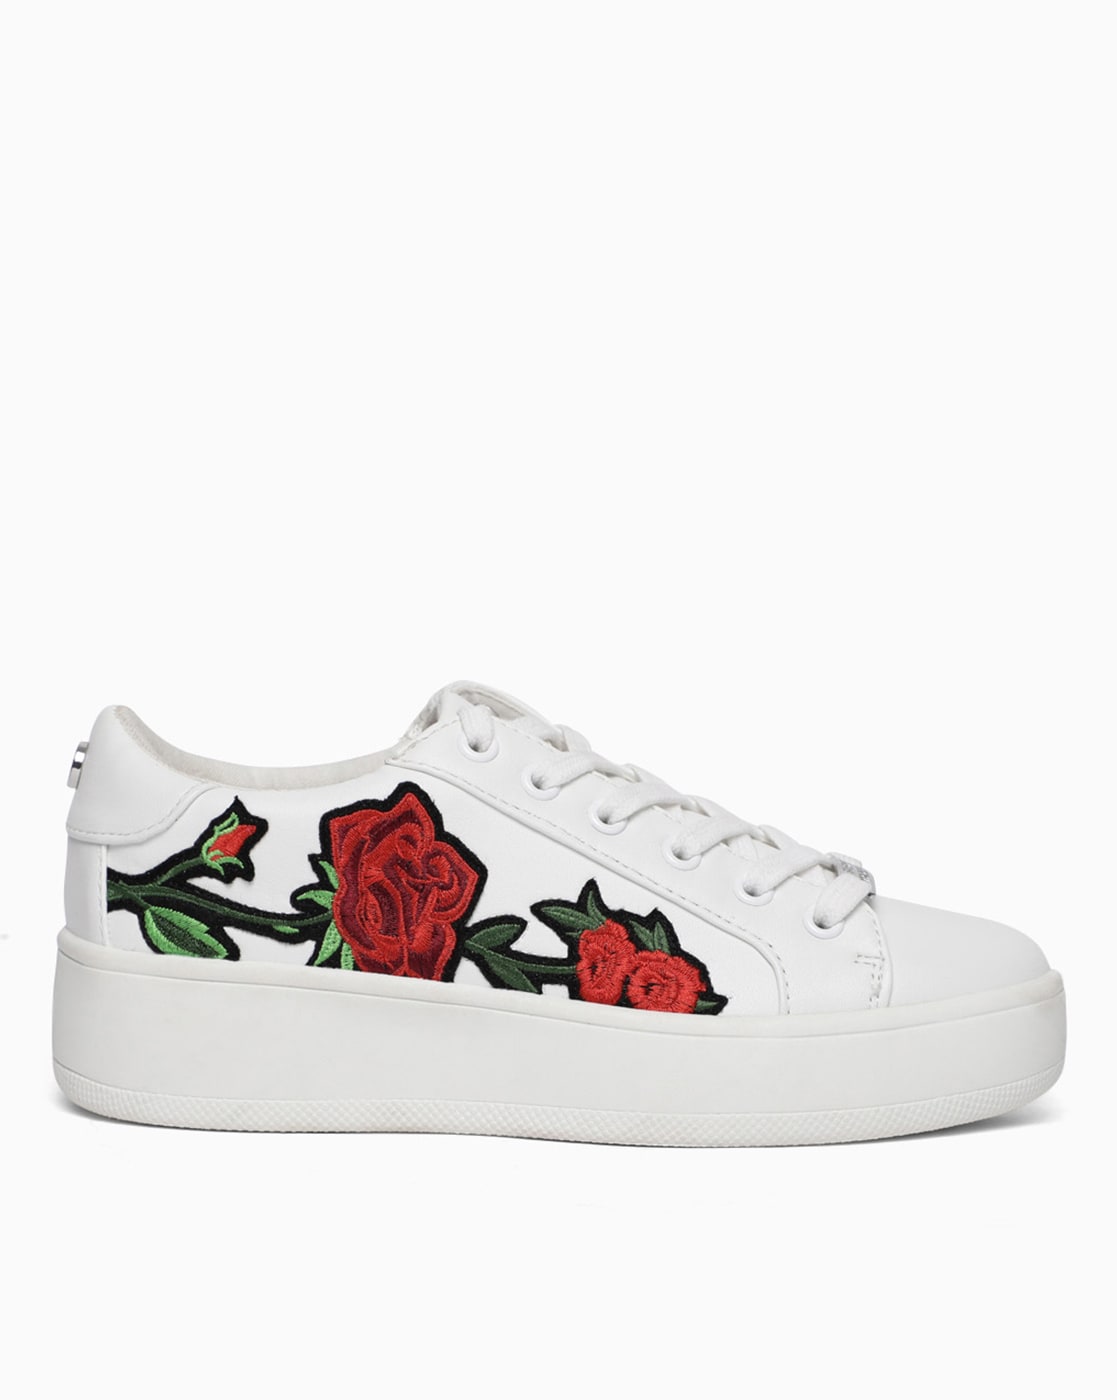 steve madden embroidered shoes